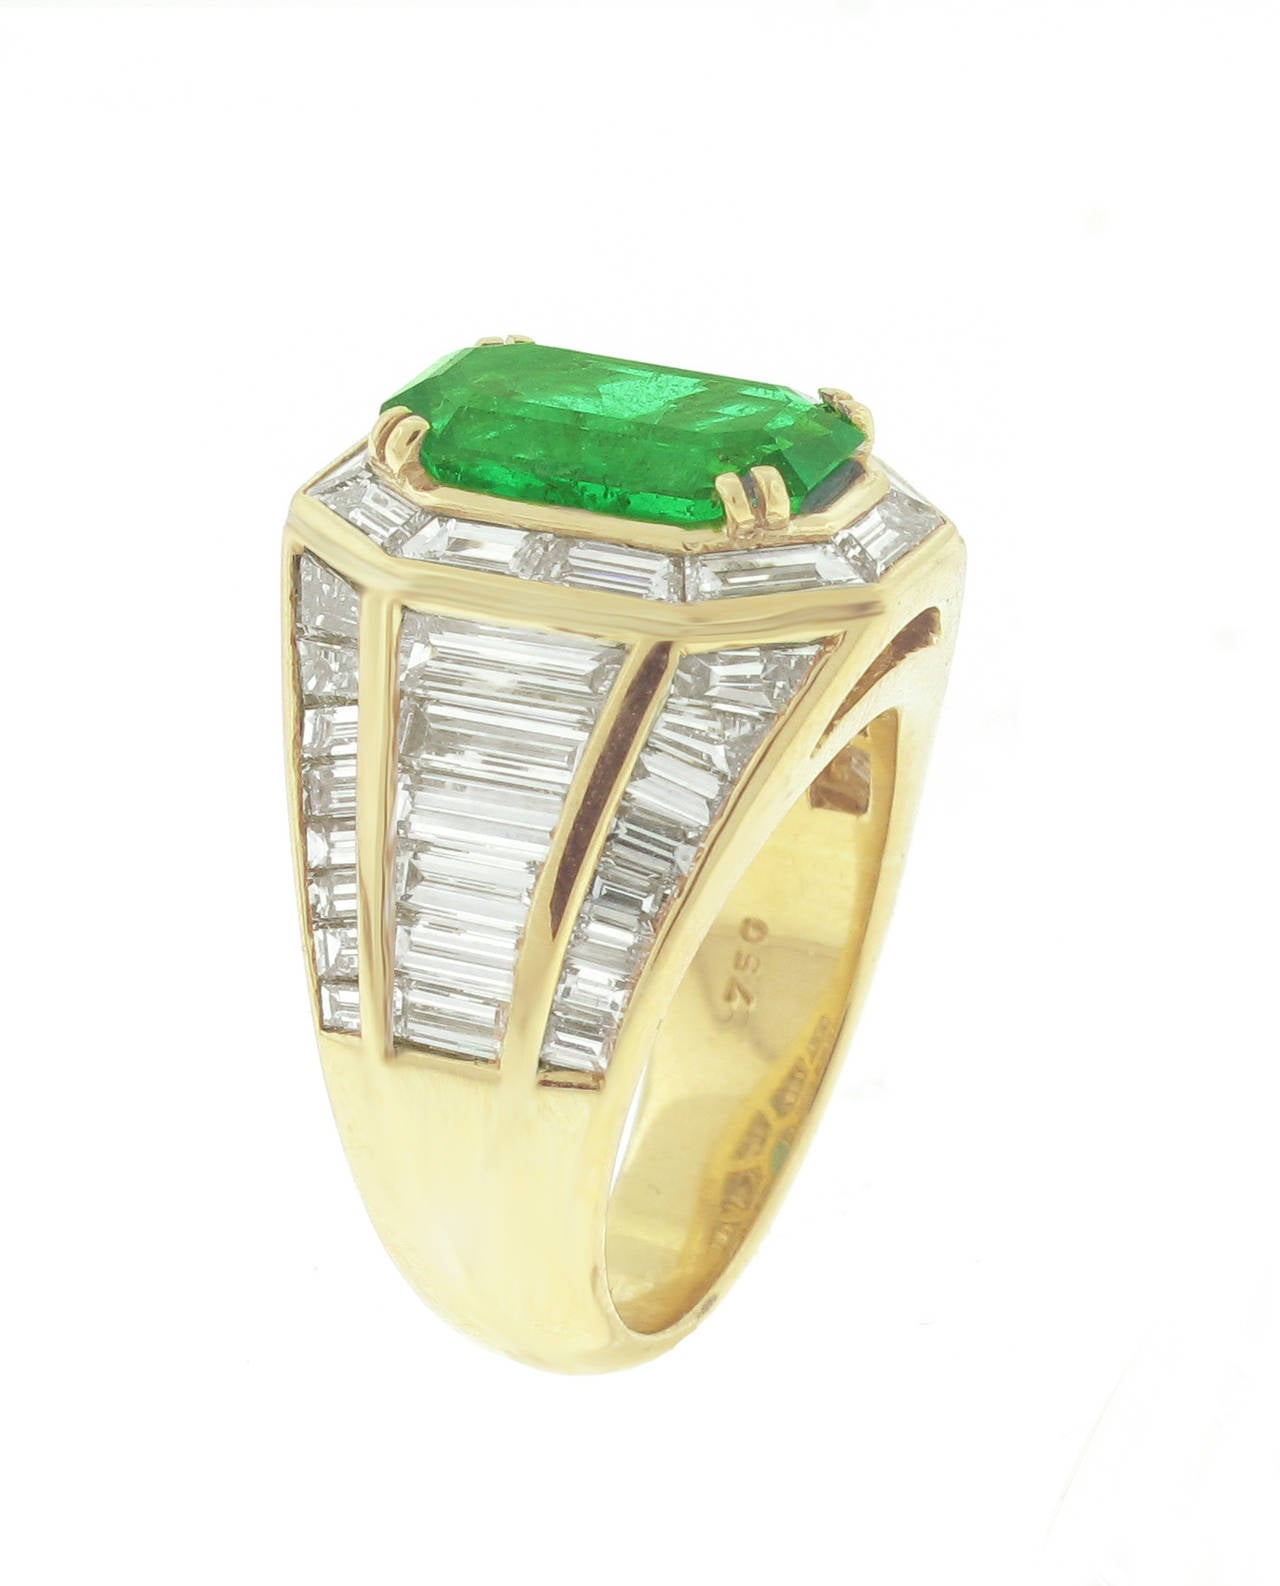 From renowned Italian master jeweler Picchiotti an emerald and diamond ring. The emerald weighs 3.28 carats. An American Gemological laboratory report states the emerald is from Colombia with minor traditional enhancements  (rare). The  44 baguette